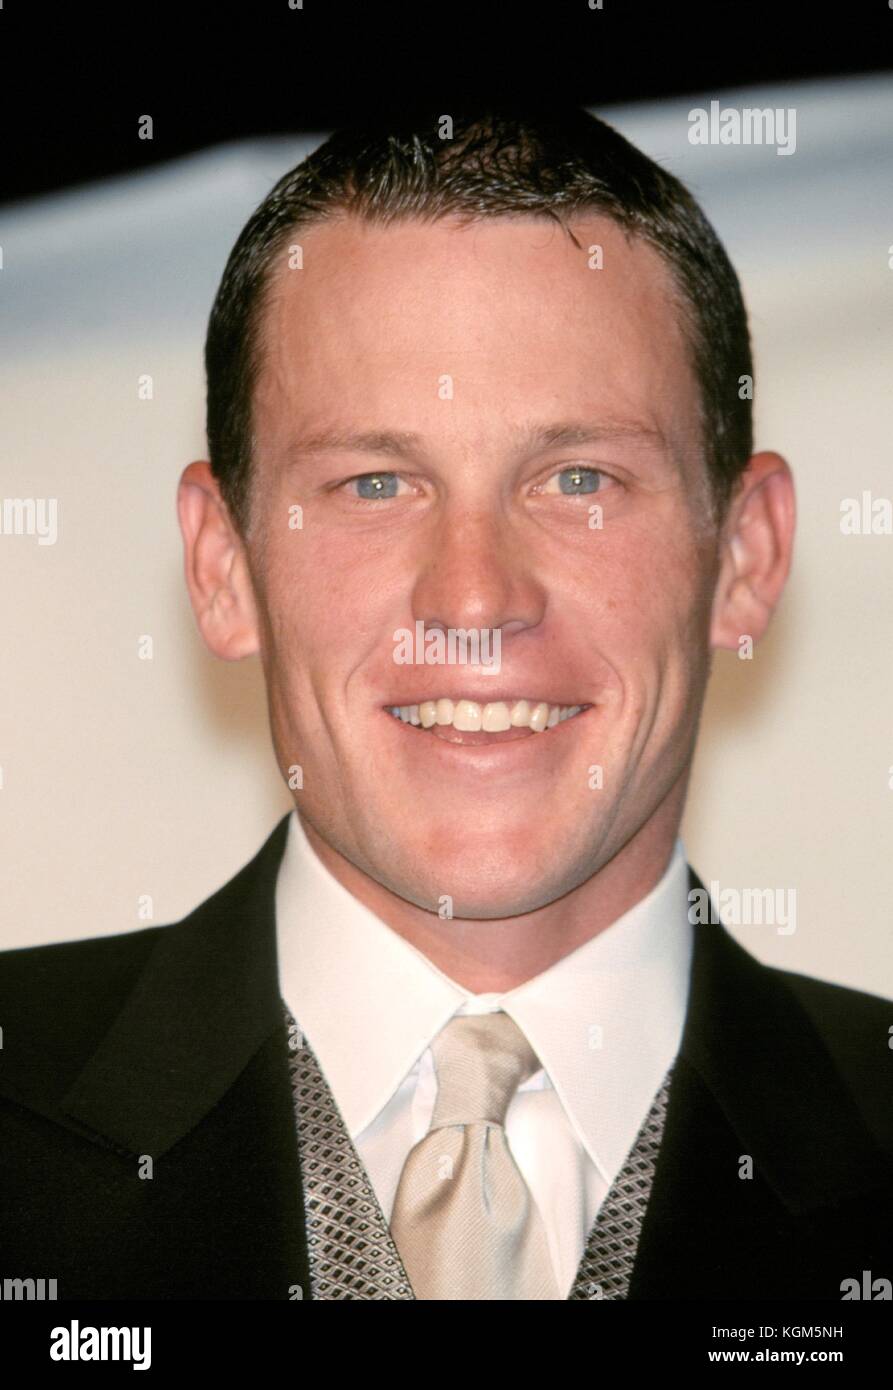 Lance Armstrong attending the GQ Men Of the Year awards at the Beacon Theatre, New York City on October 21, 1999. Credit: RTSpellman / MediaPunch Stock Photo